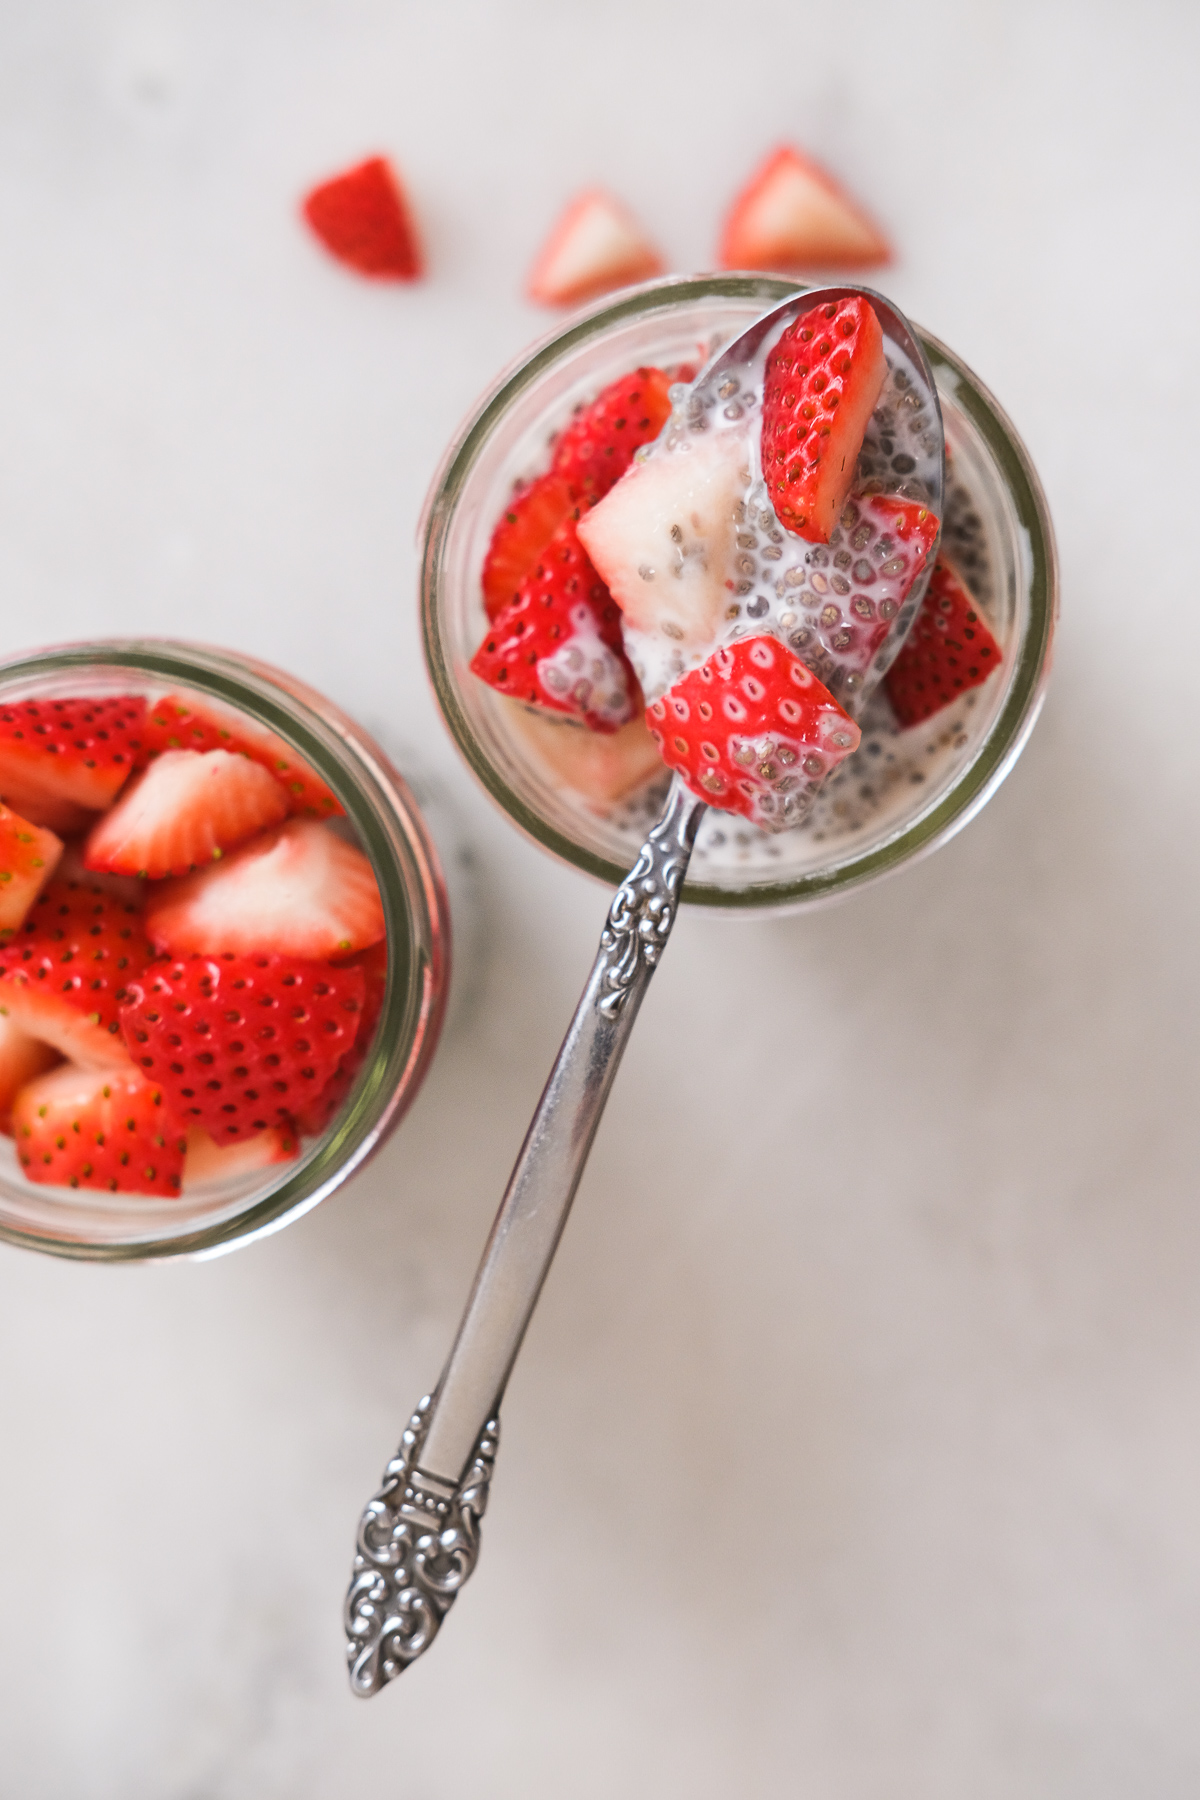 scooping out chia seed pudding with fresh strawberries